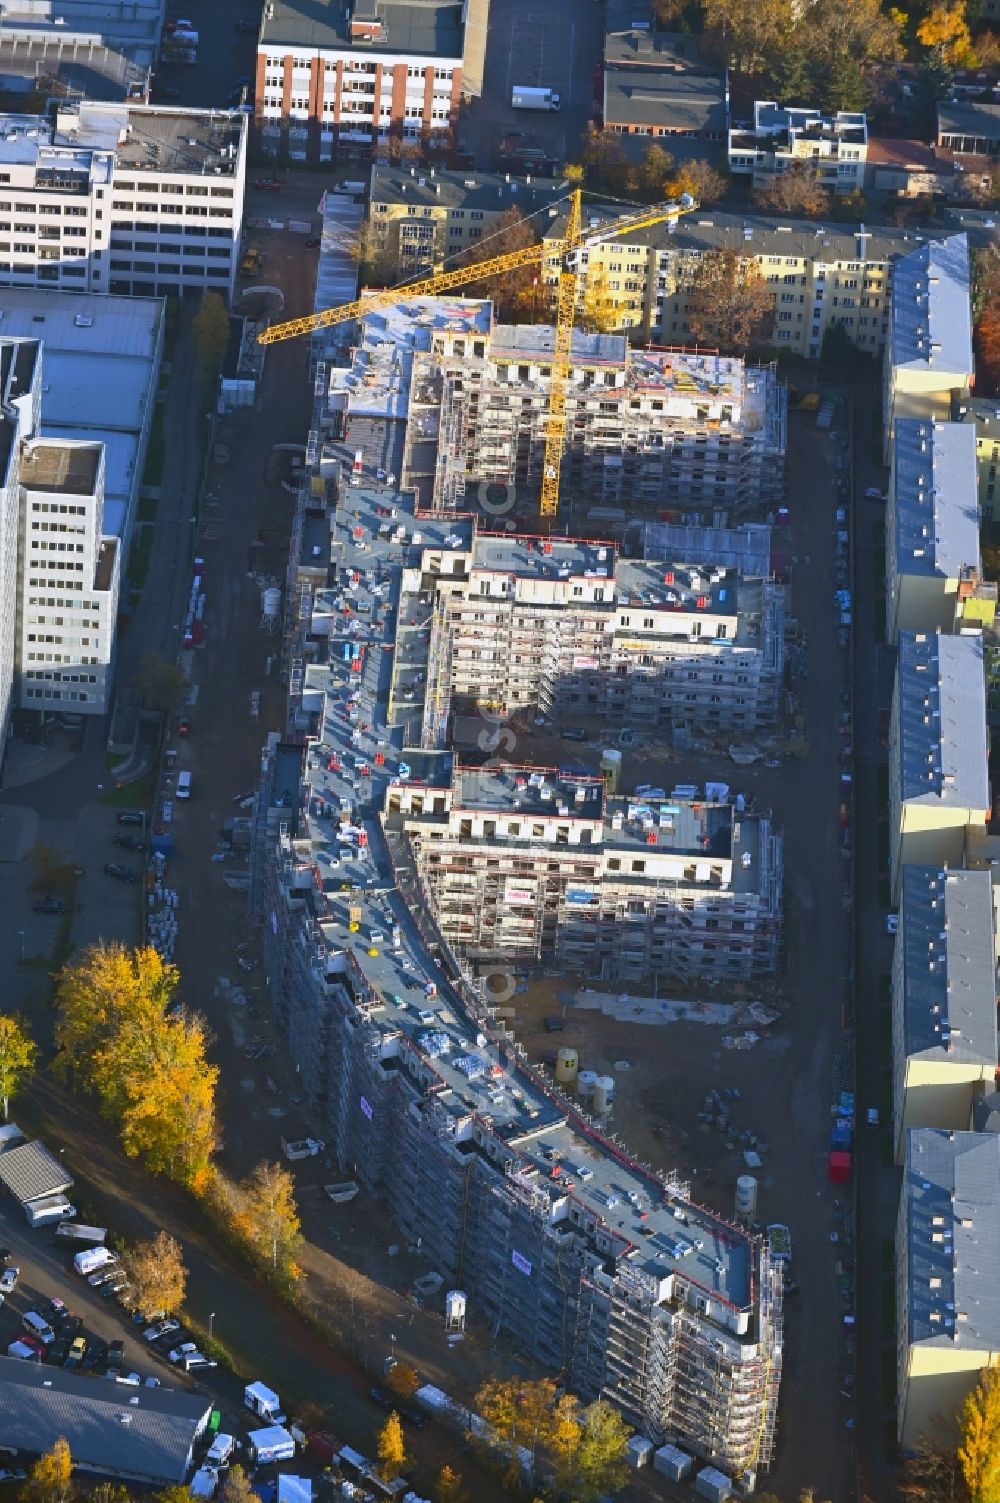 Berlin from above - Construction site to build a new multi-family residential complex Eythstrasse corner Bessemerstrasse in the district Schoeneberg in Berlin, Germany